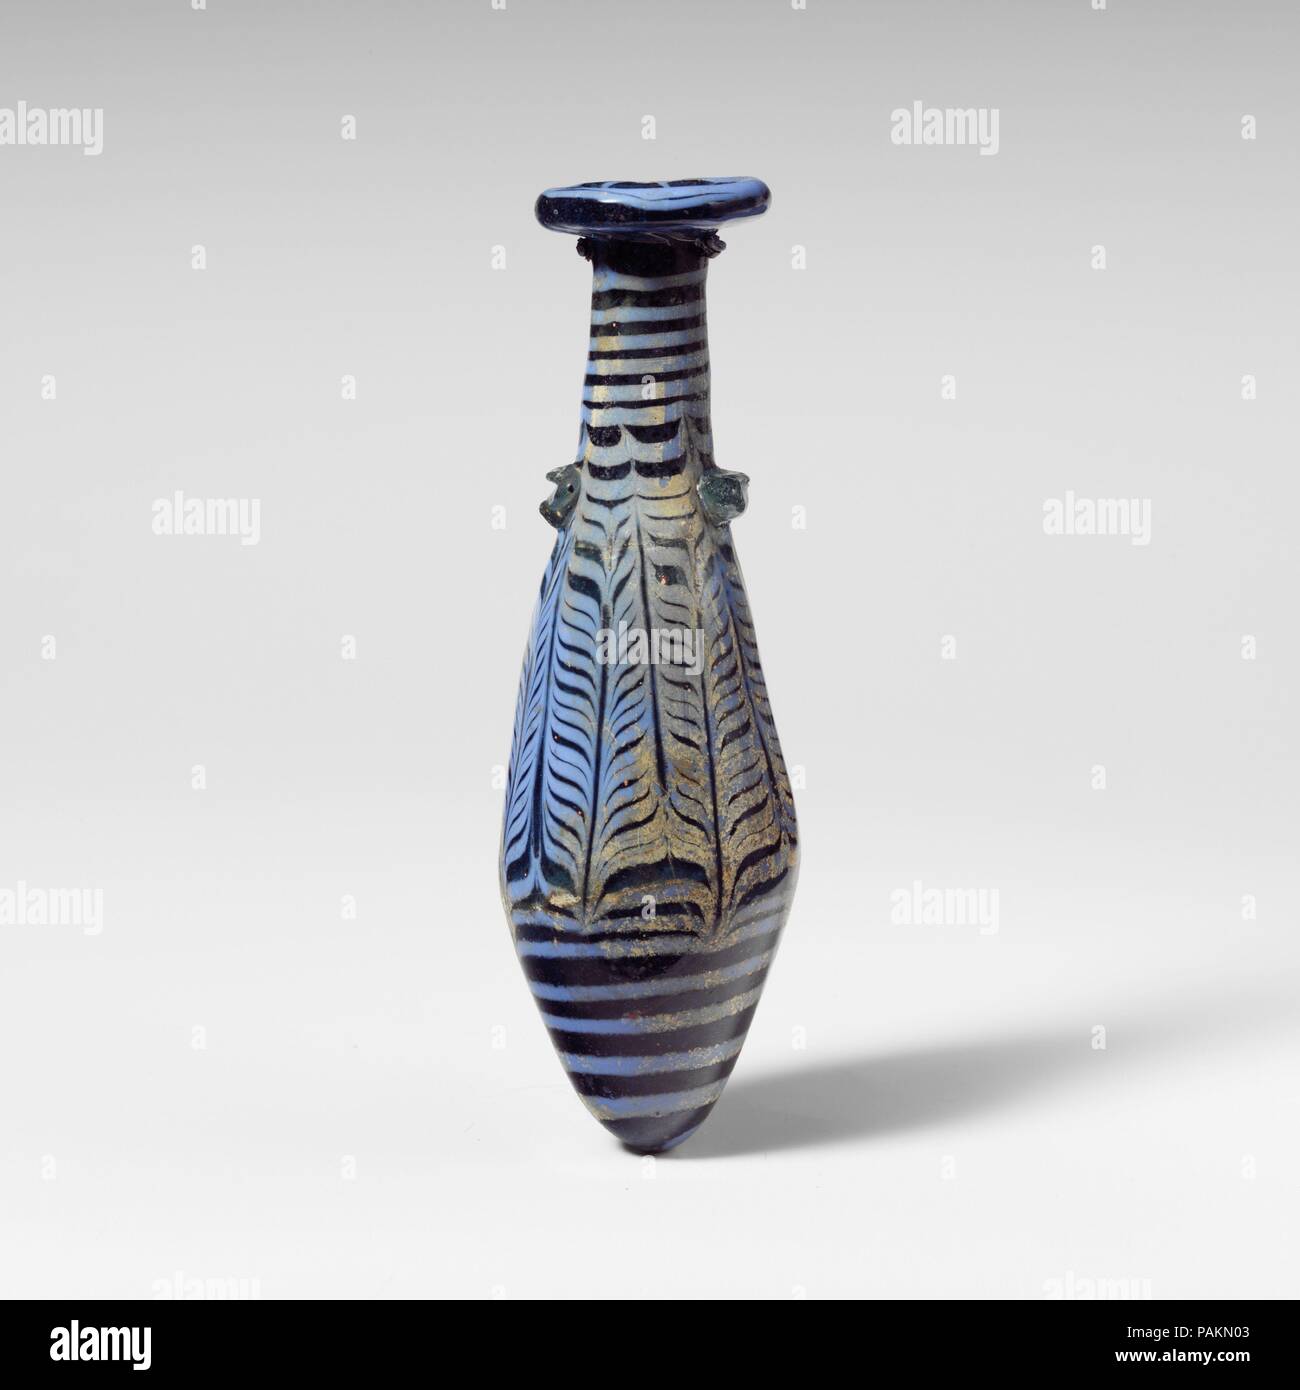 Glass alabastron (perfume bottle). Culture: Greek, Eastern Mediterranean. Dimensions: H.: 5 in. (12.7 cm). Date: 2nd-1st century B.C..  Translucent blue, with handles in light blue green; trail in opaque greyish light blue.  Broad slightly inward-sloping rim-disk with thick rounded edge and radiating tooling marks on lower surface; tall cylindrical neck, expanding downward; straight-sided fusiform body expanding downward, then tapering in to pointed bottom; two horizontal lug handles applied over trail at top of body, one with a deep horizontal indent in surface; one small marvered blob of tra Stock Photo